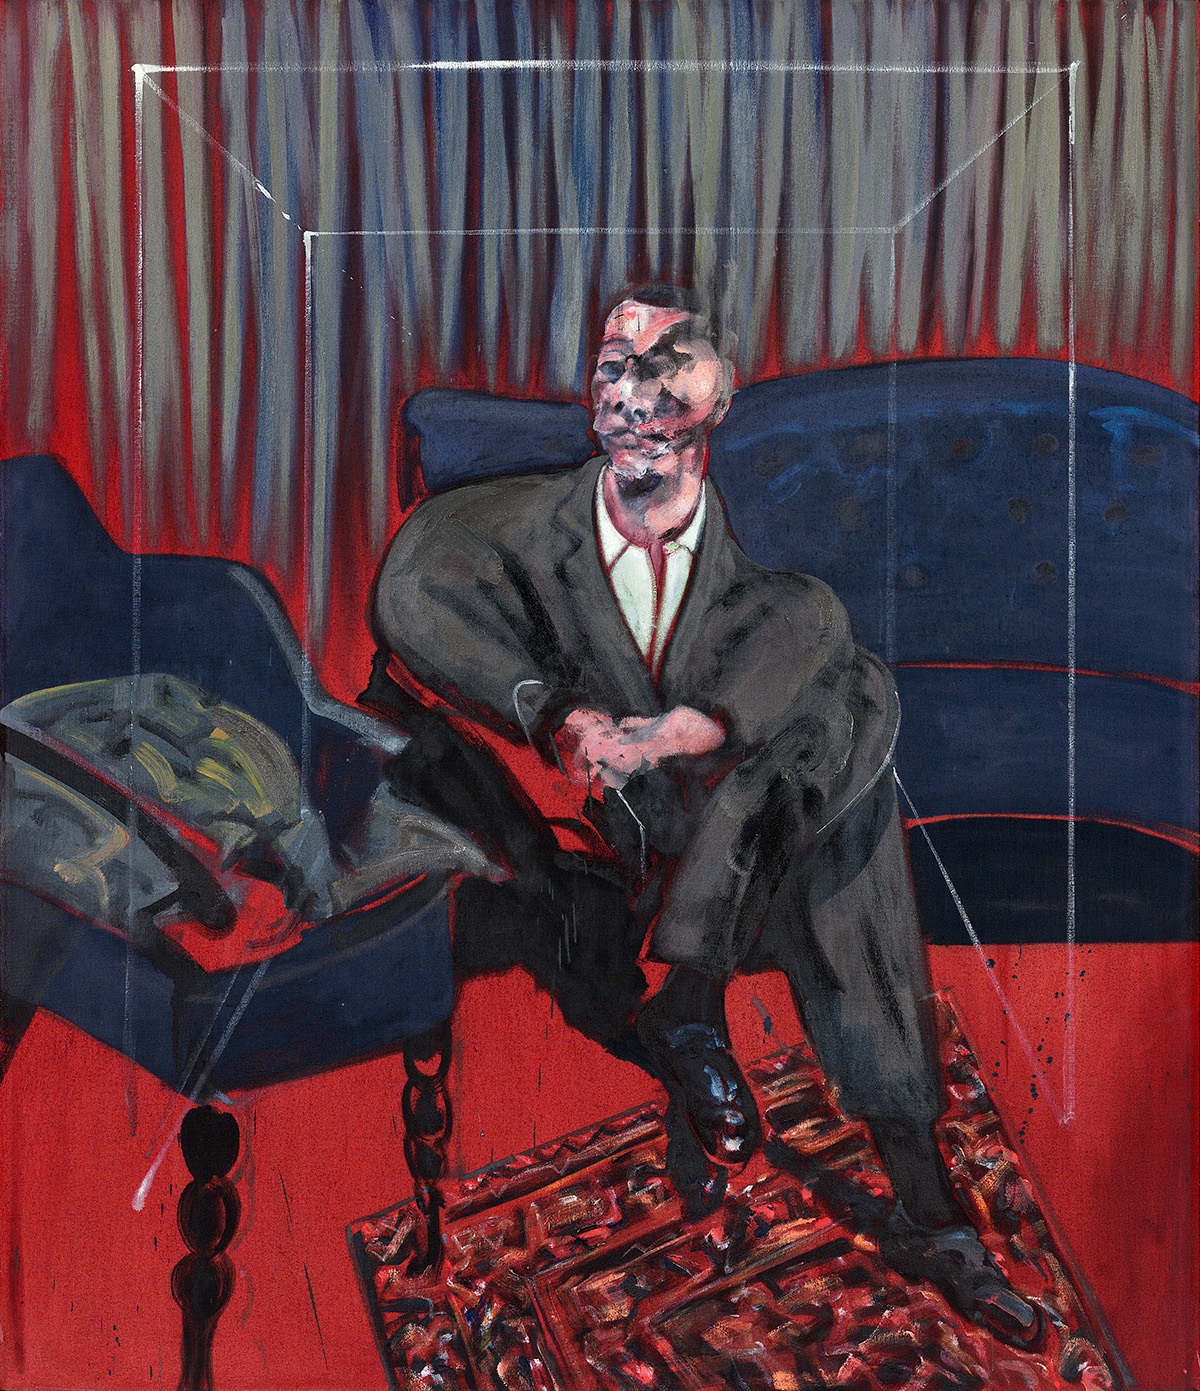 Seated Figure, 1961. Oil on canvas. CR no. 61-16. © The Estate of Francis Bacon / DACS London 2022. All rights reserved.